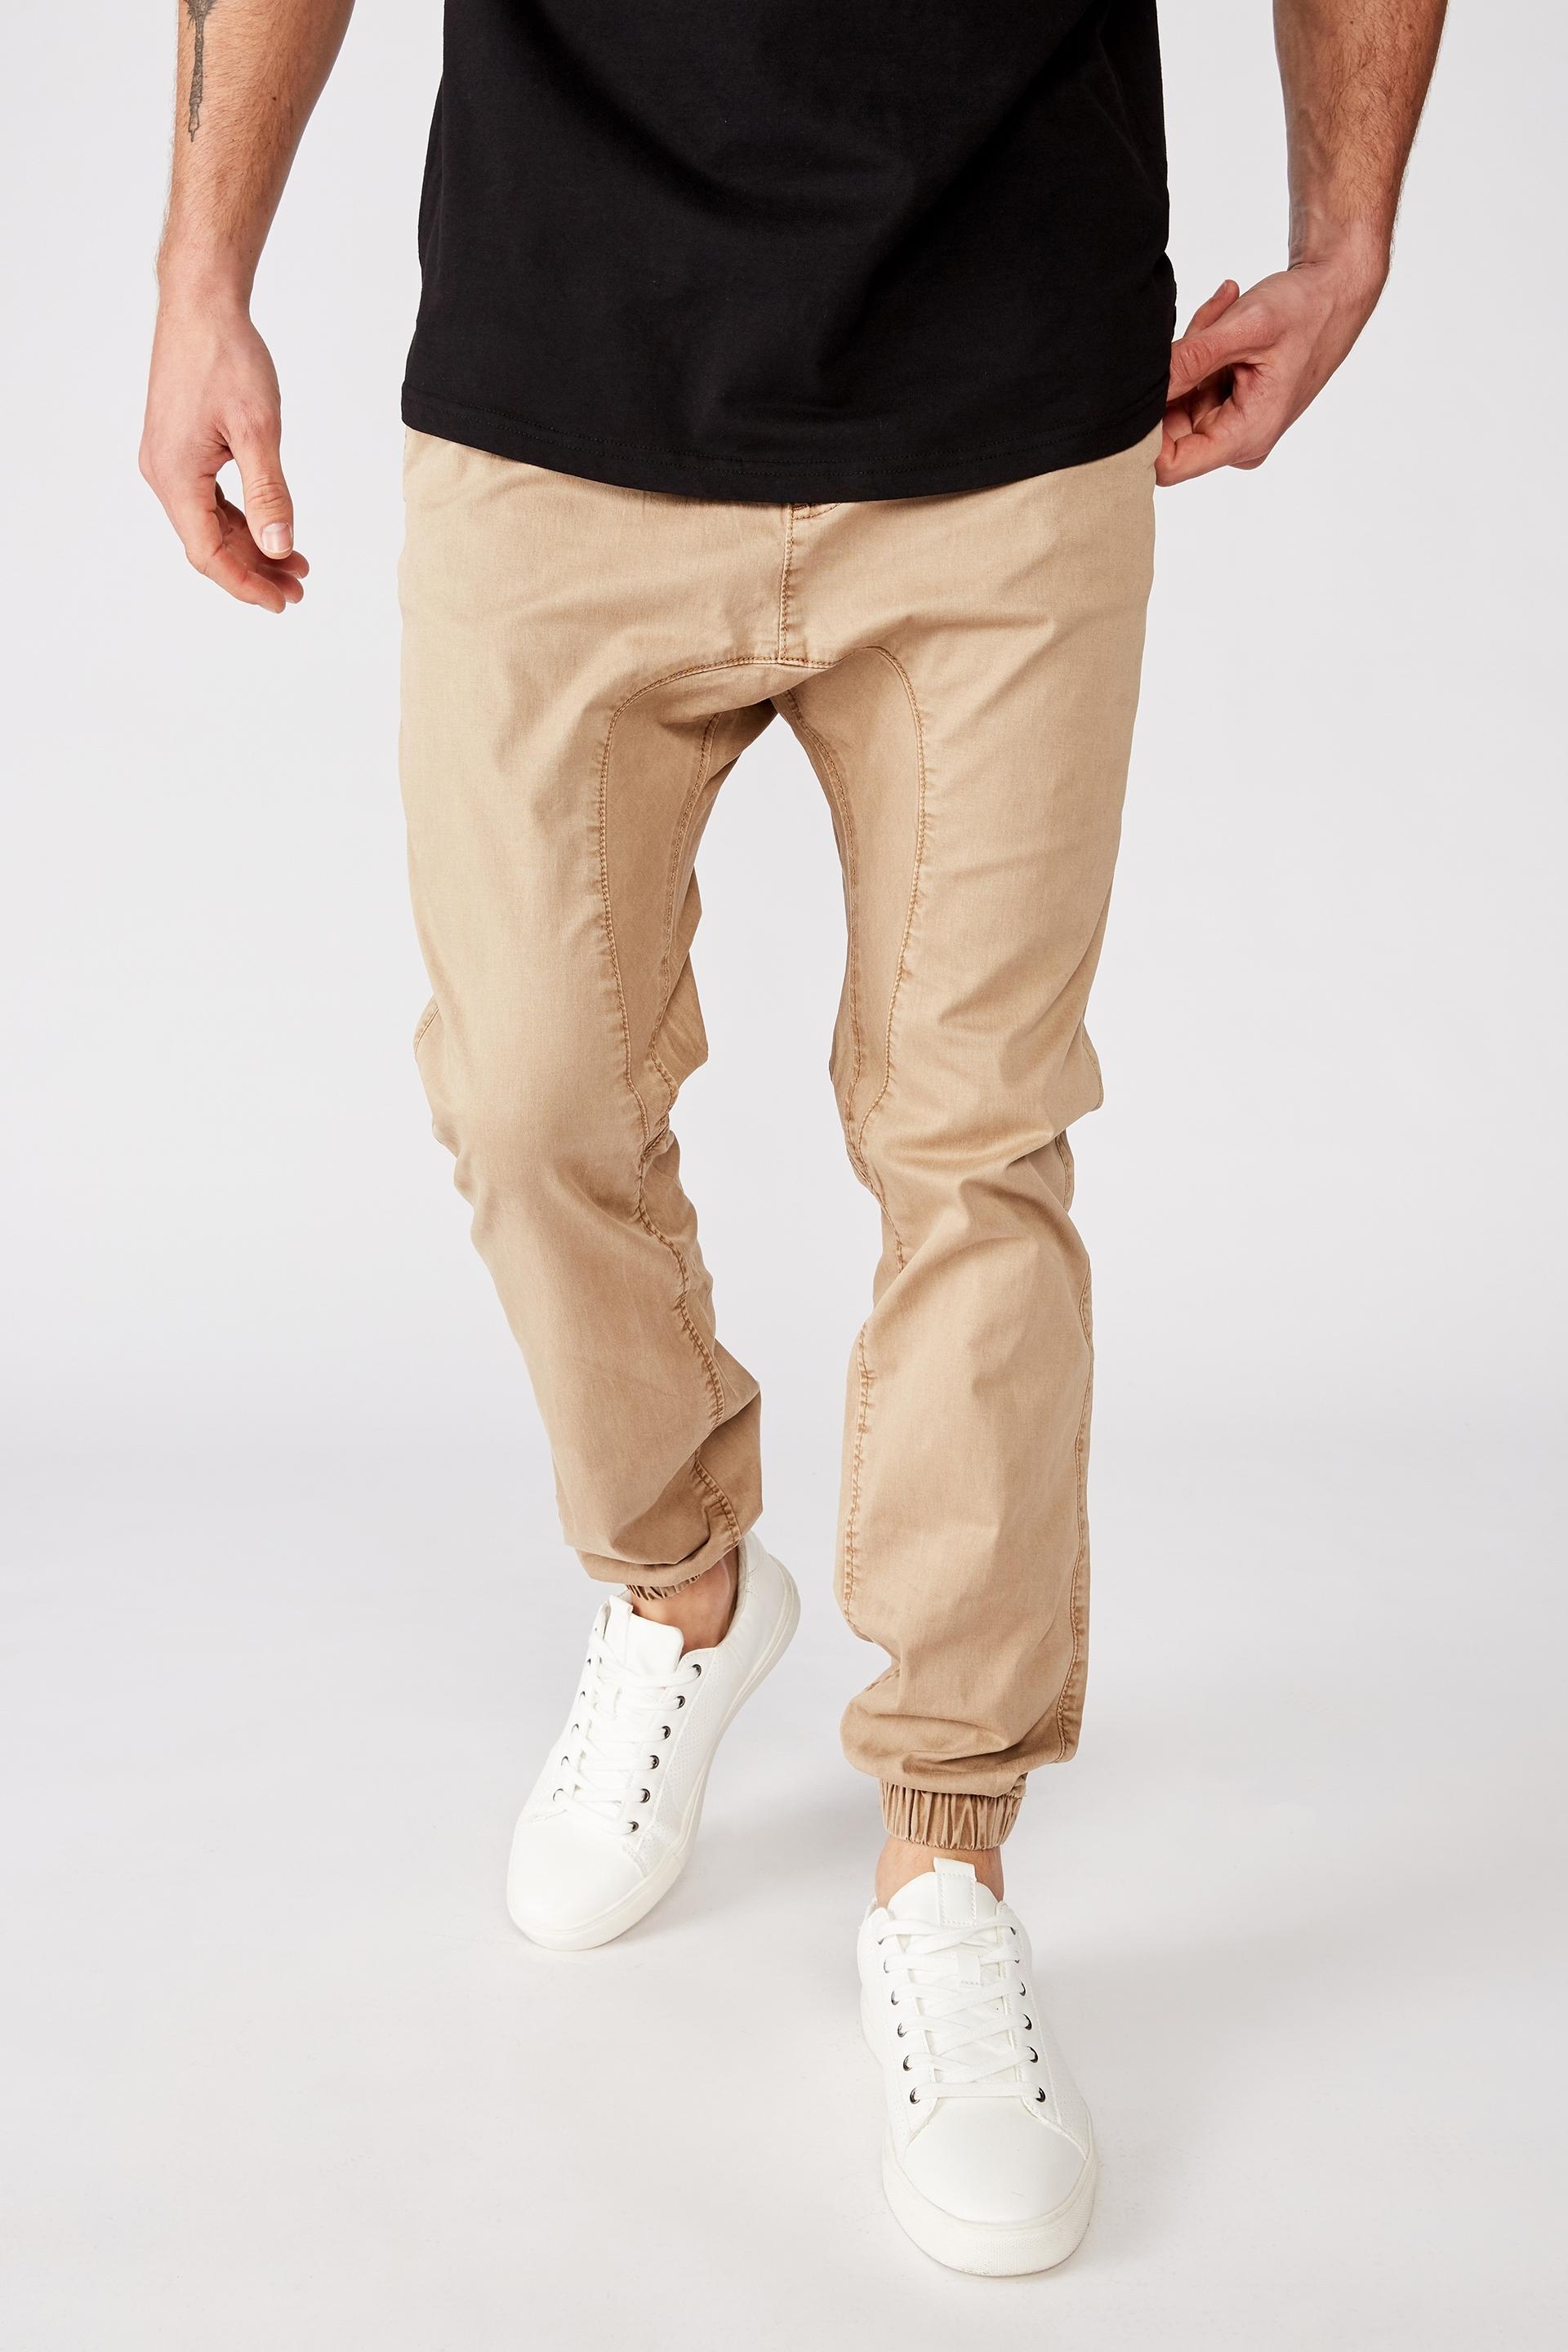 Drake cuffed pant - beige Cotton On Pants & Chinos | Superbalist.com